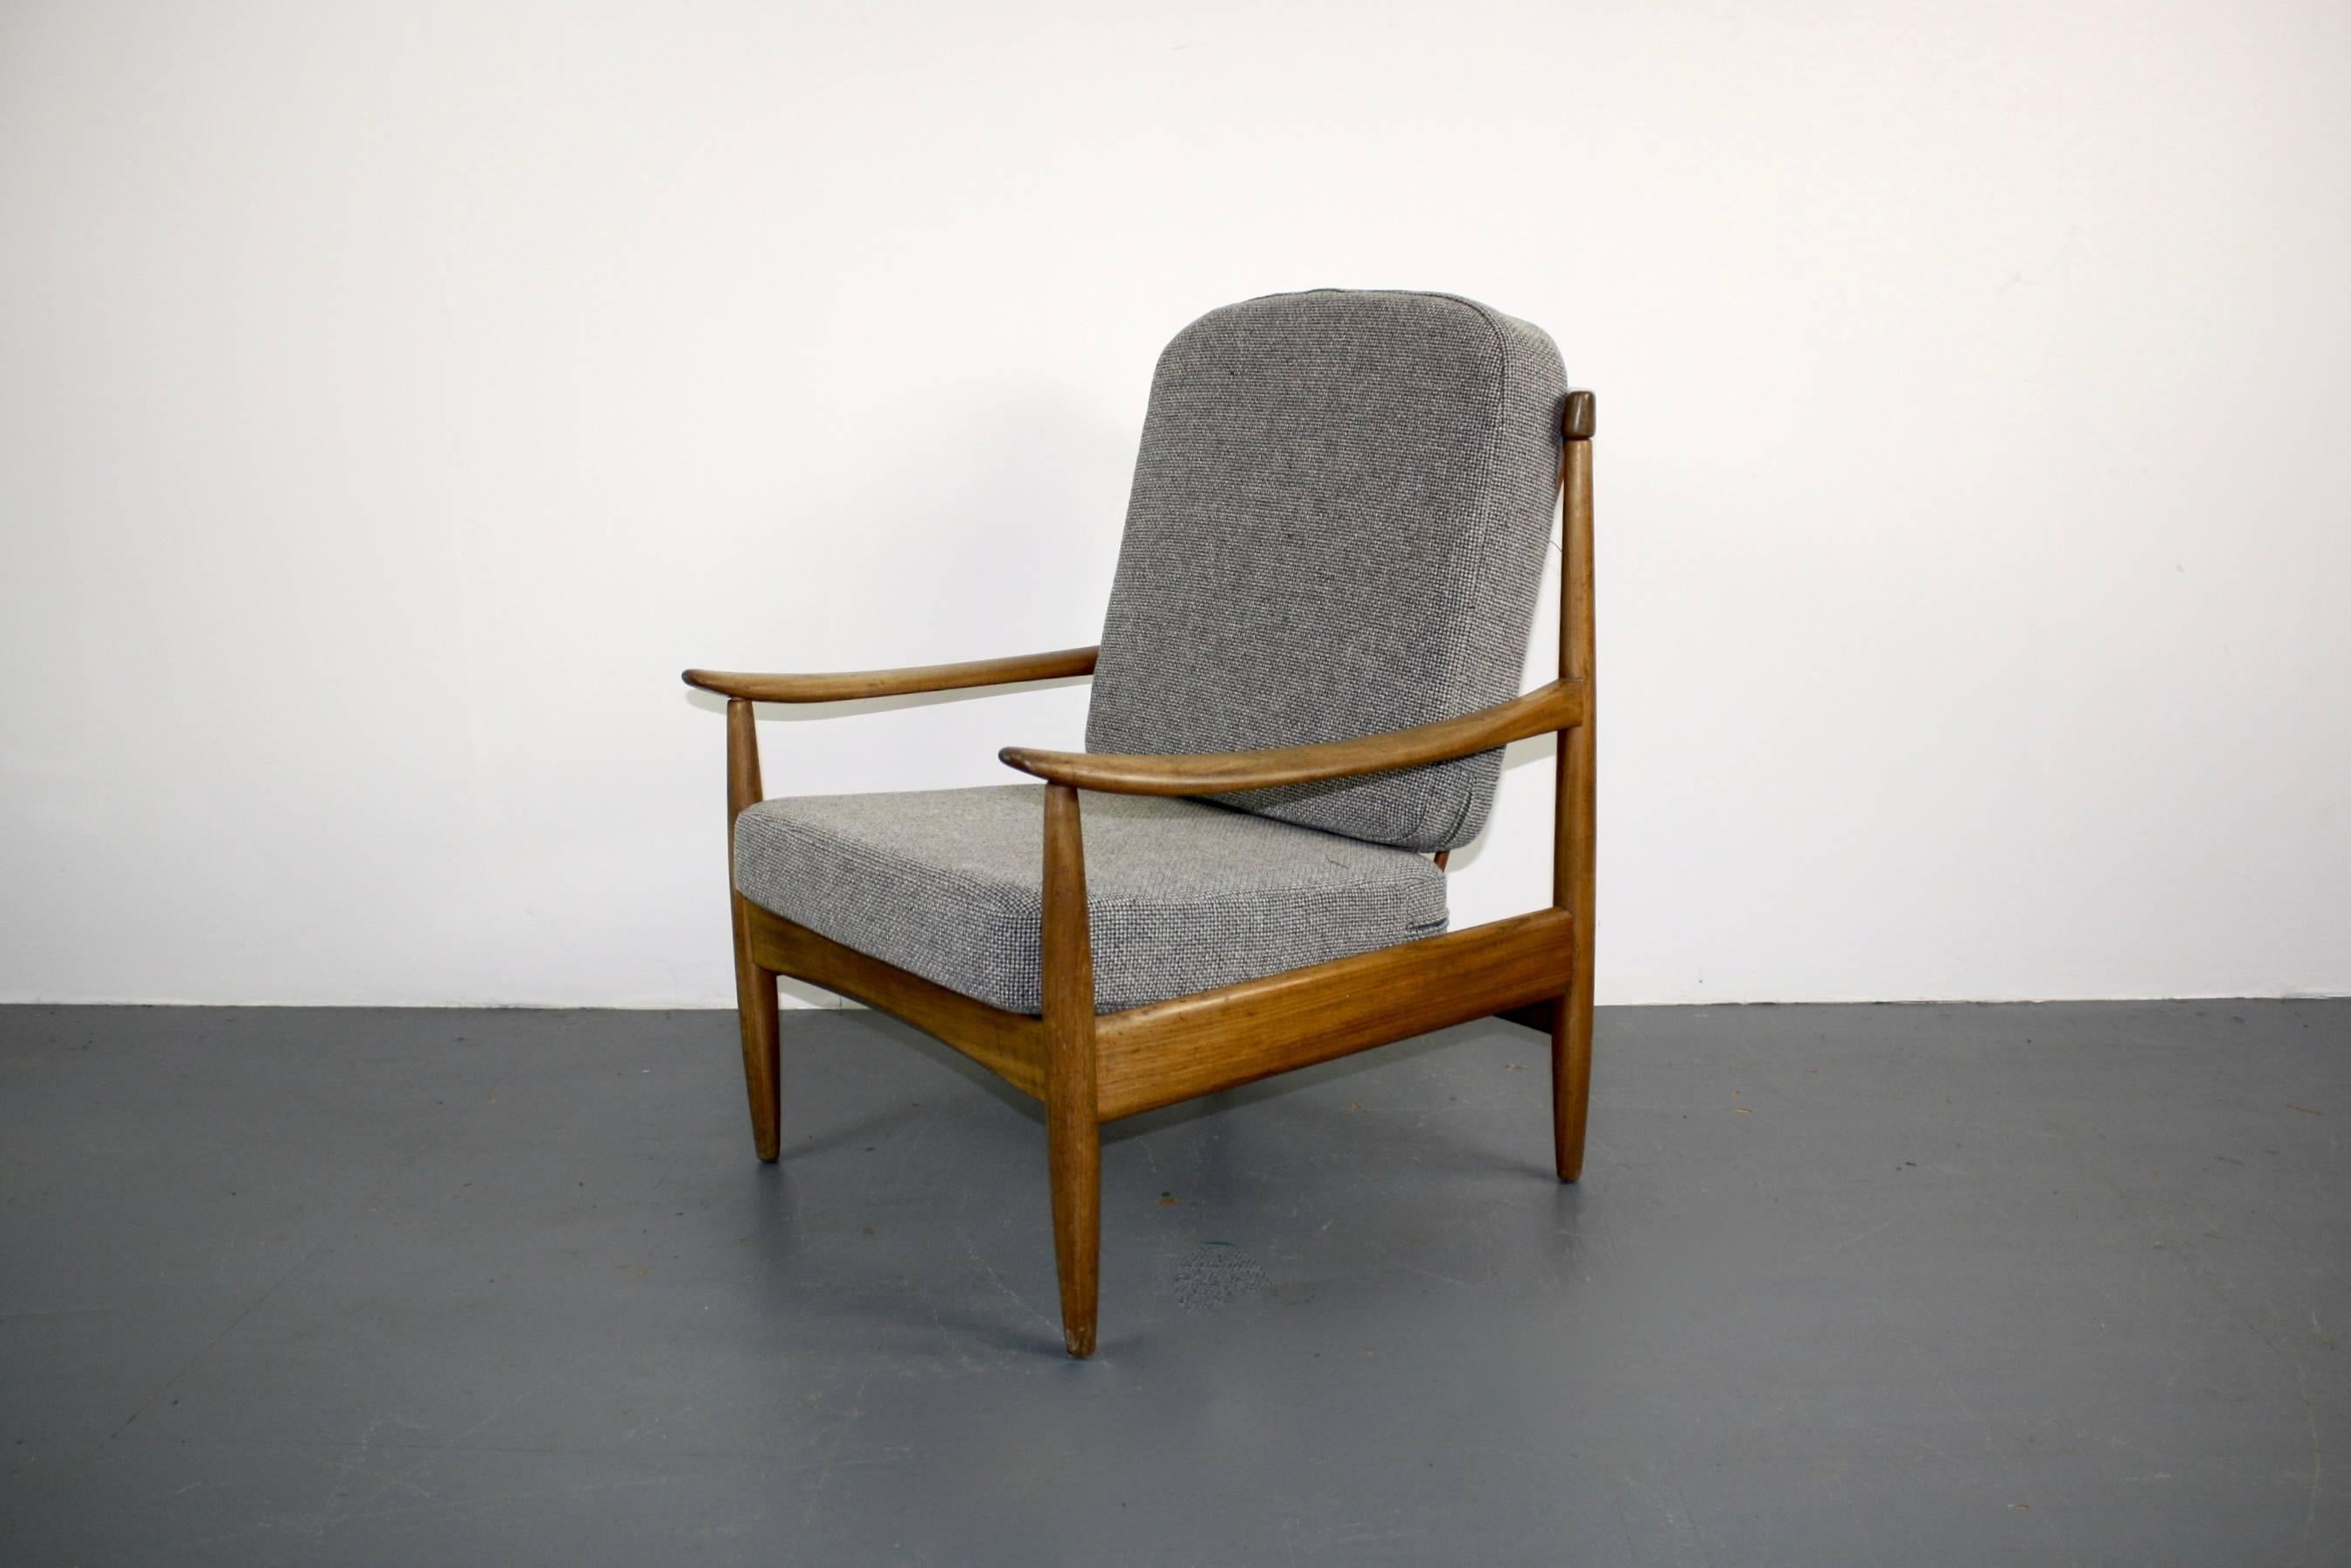 Midcentury Danish Teak Lounge Chair In Good Condition For Sale In Lewes, East Sussex